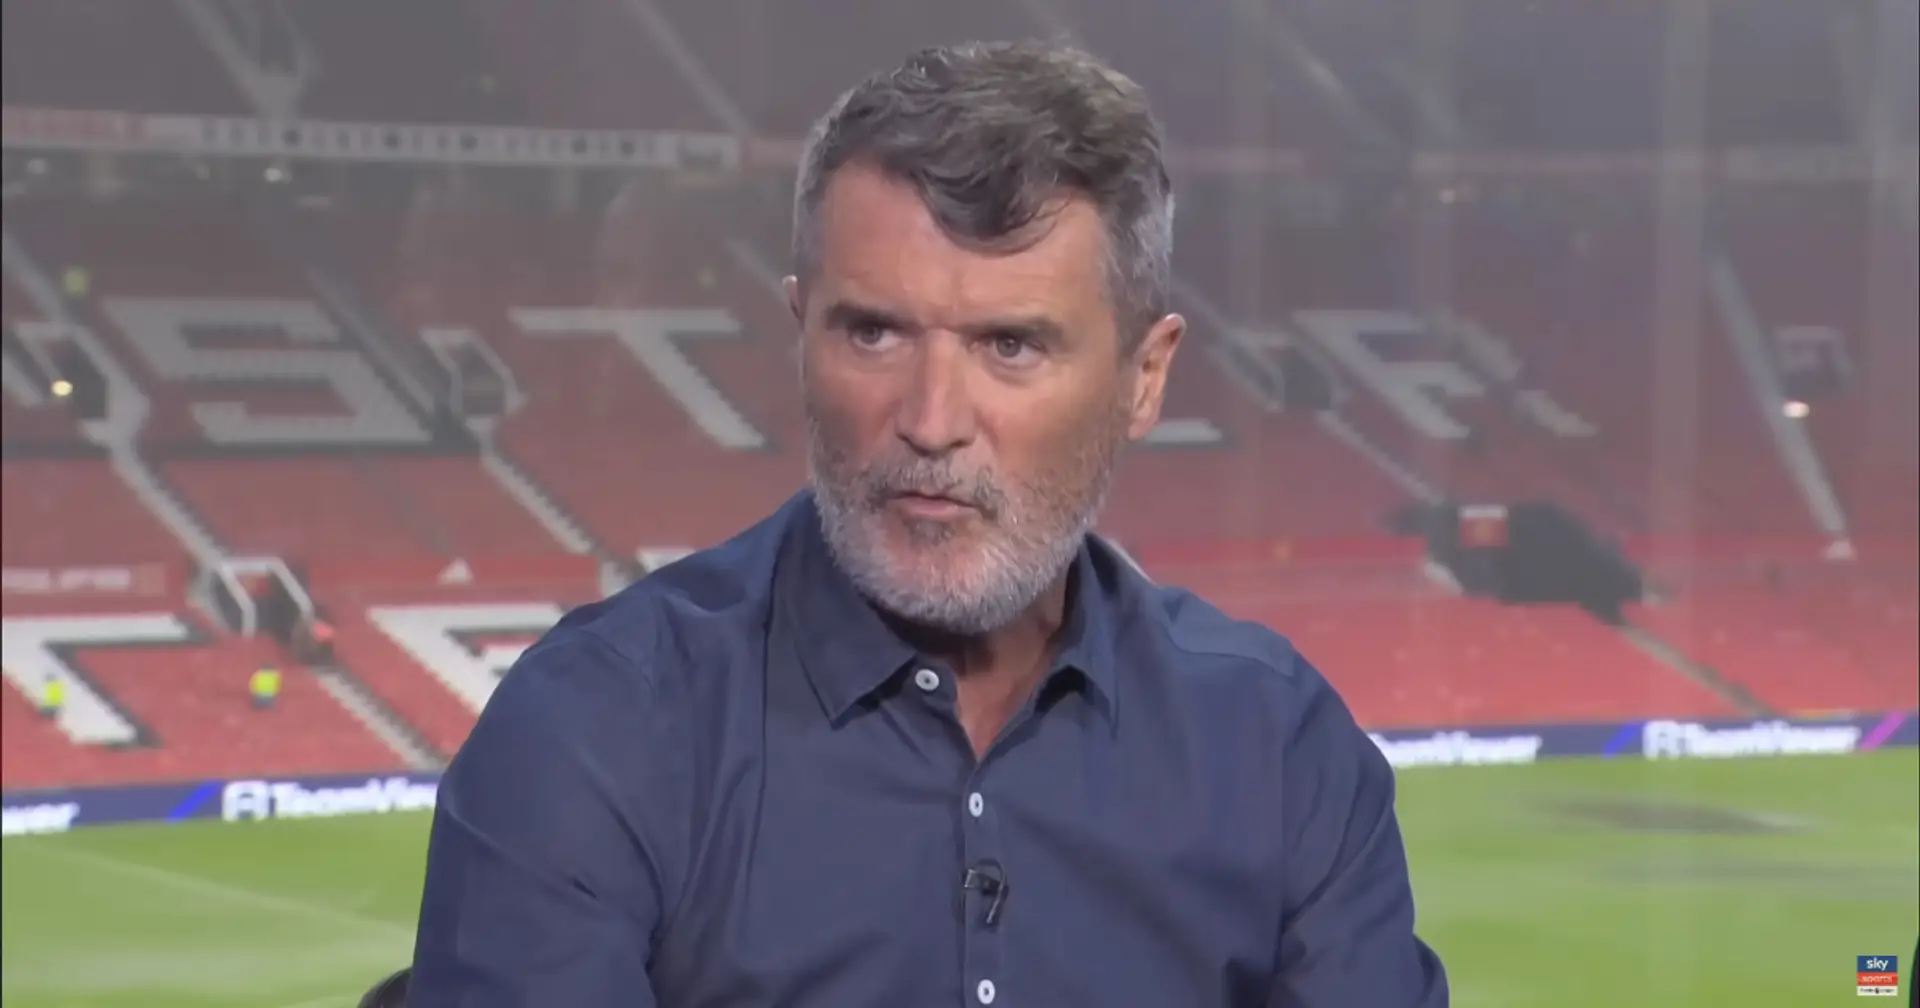 Roy Keane: 'I hope Ten Hag is given more time to get things right'